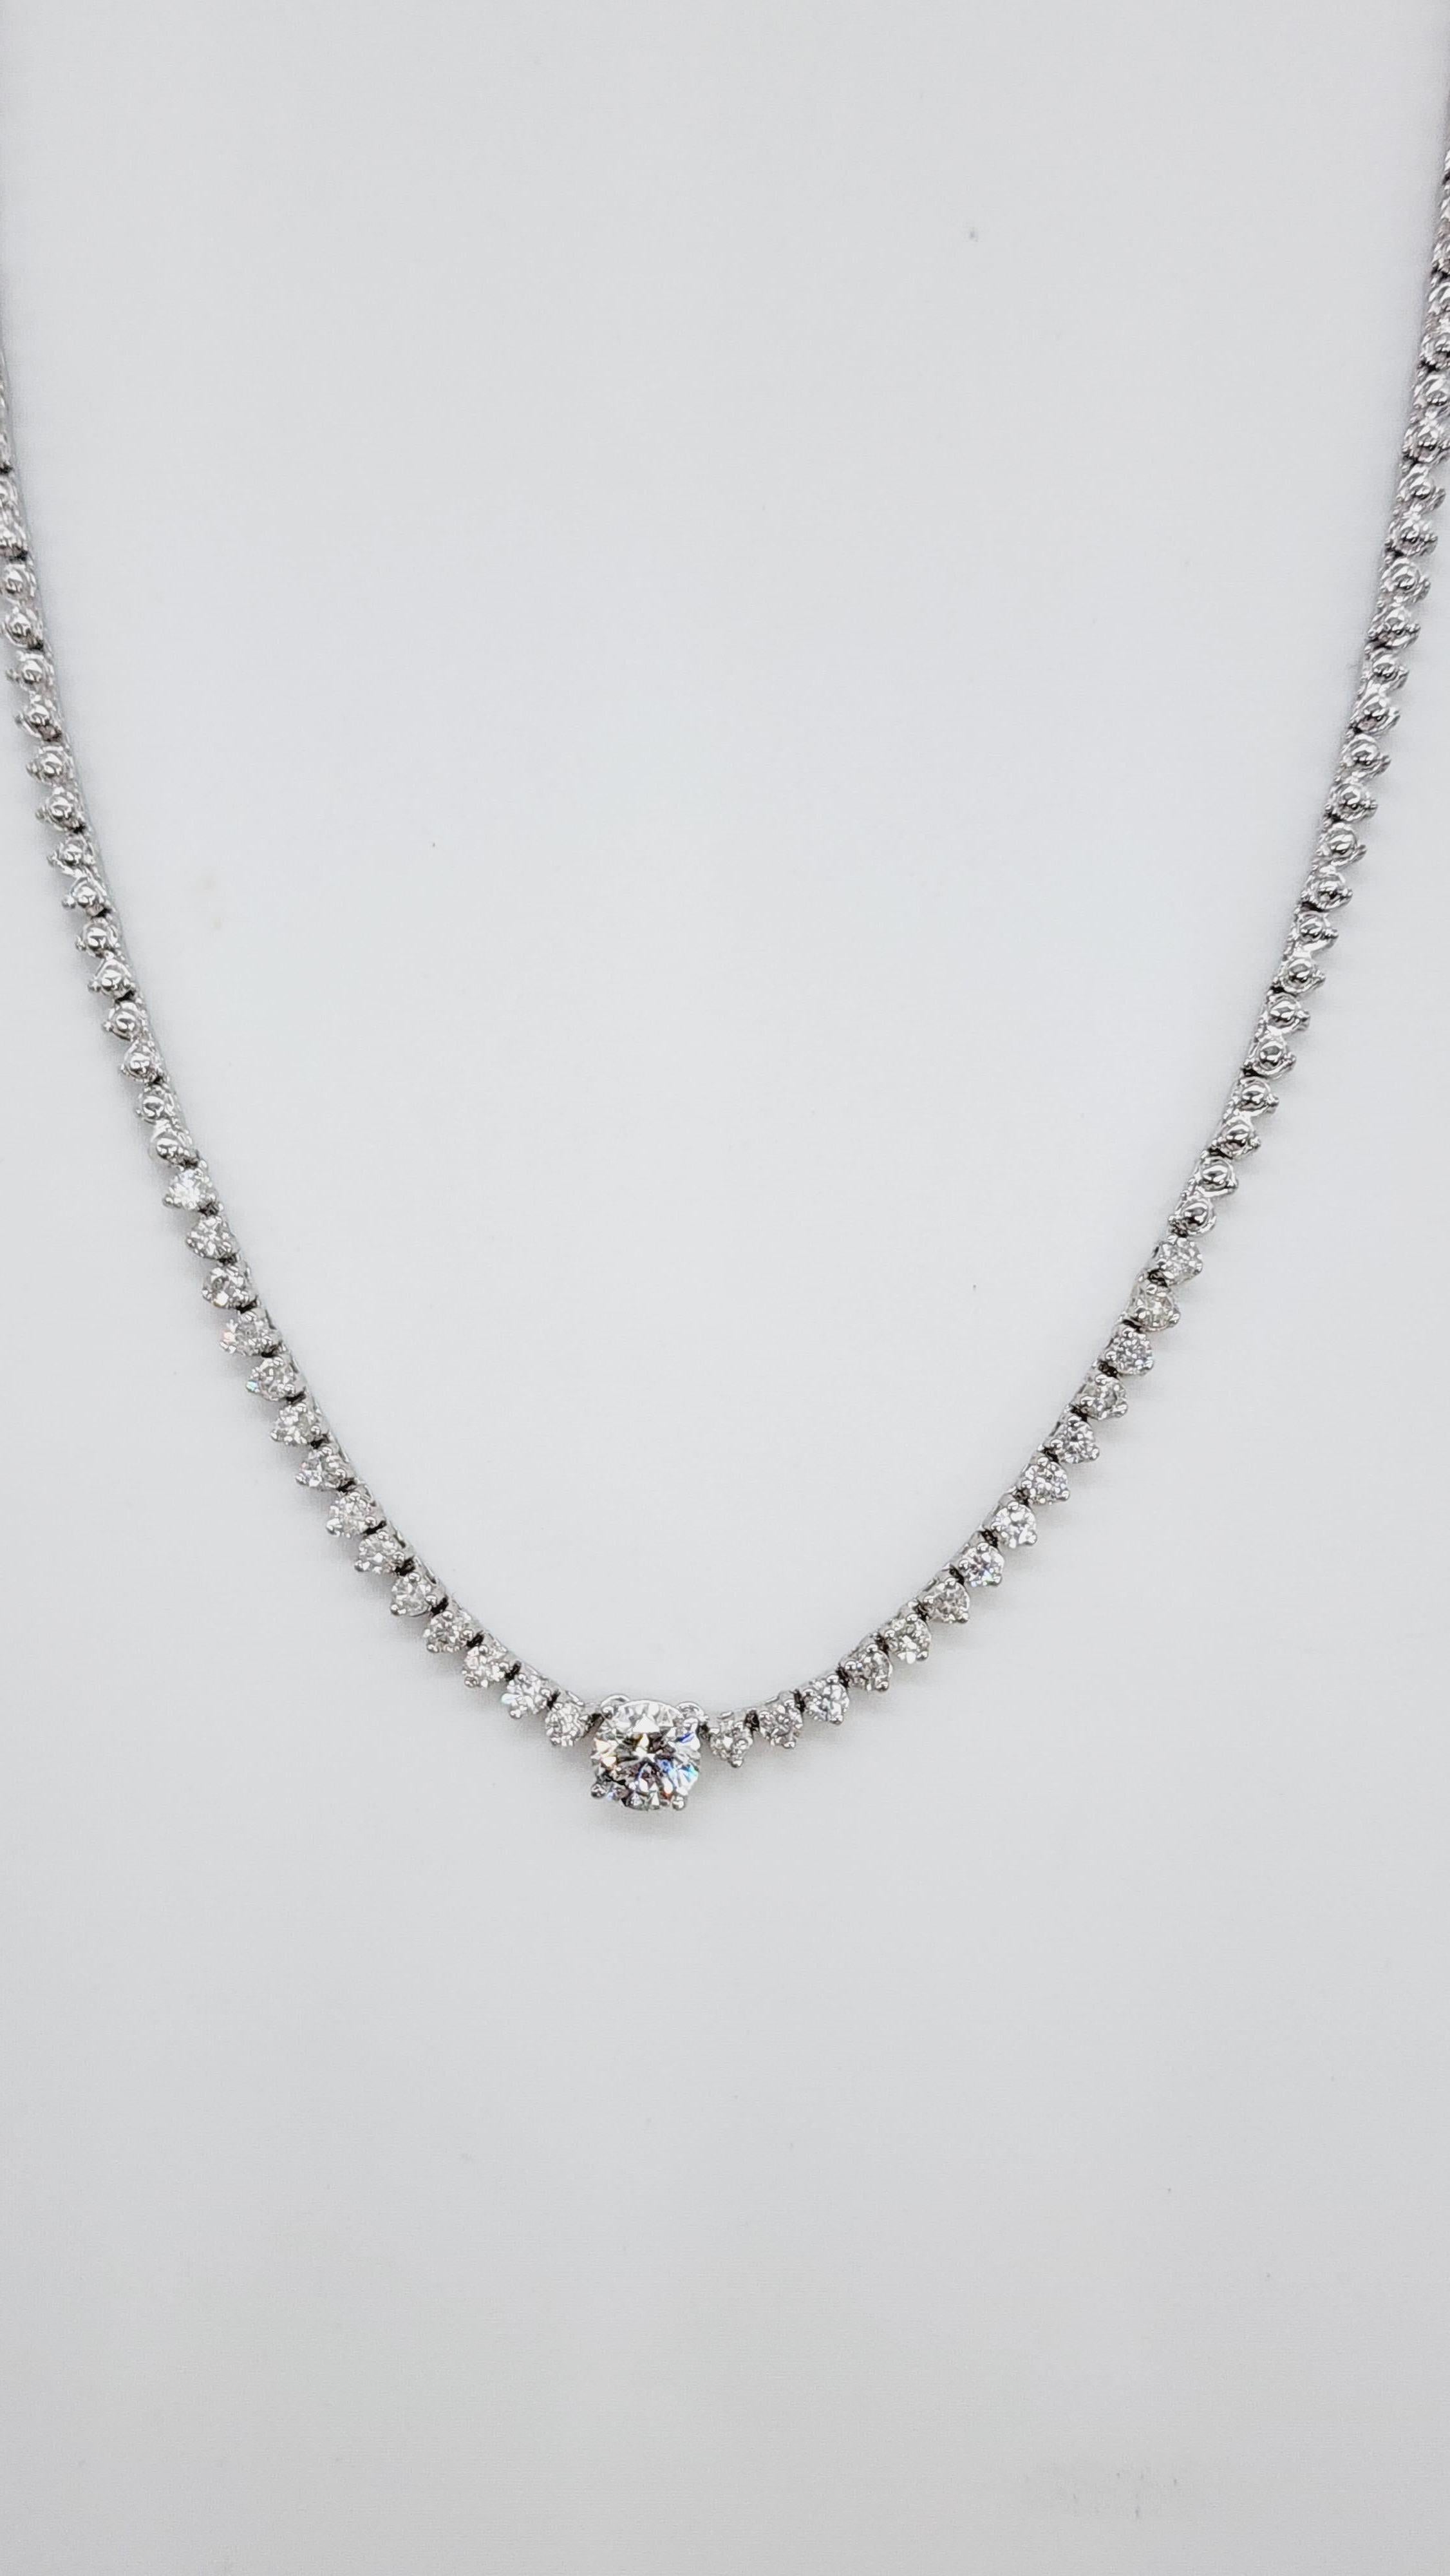 2.11 Carats Diamond Necklace 14 Karat White Gold 16'' In New Condition For Sale In Great Neck, NY